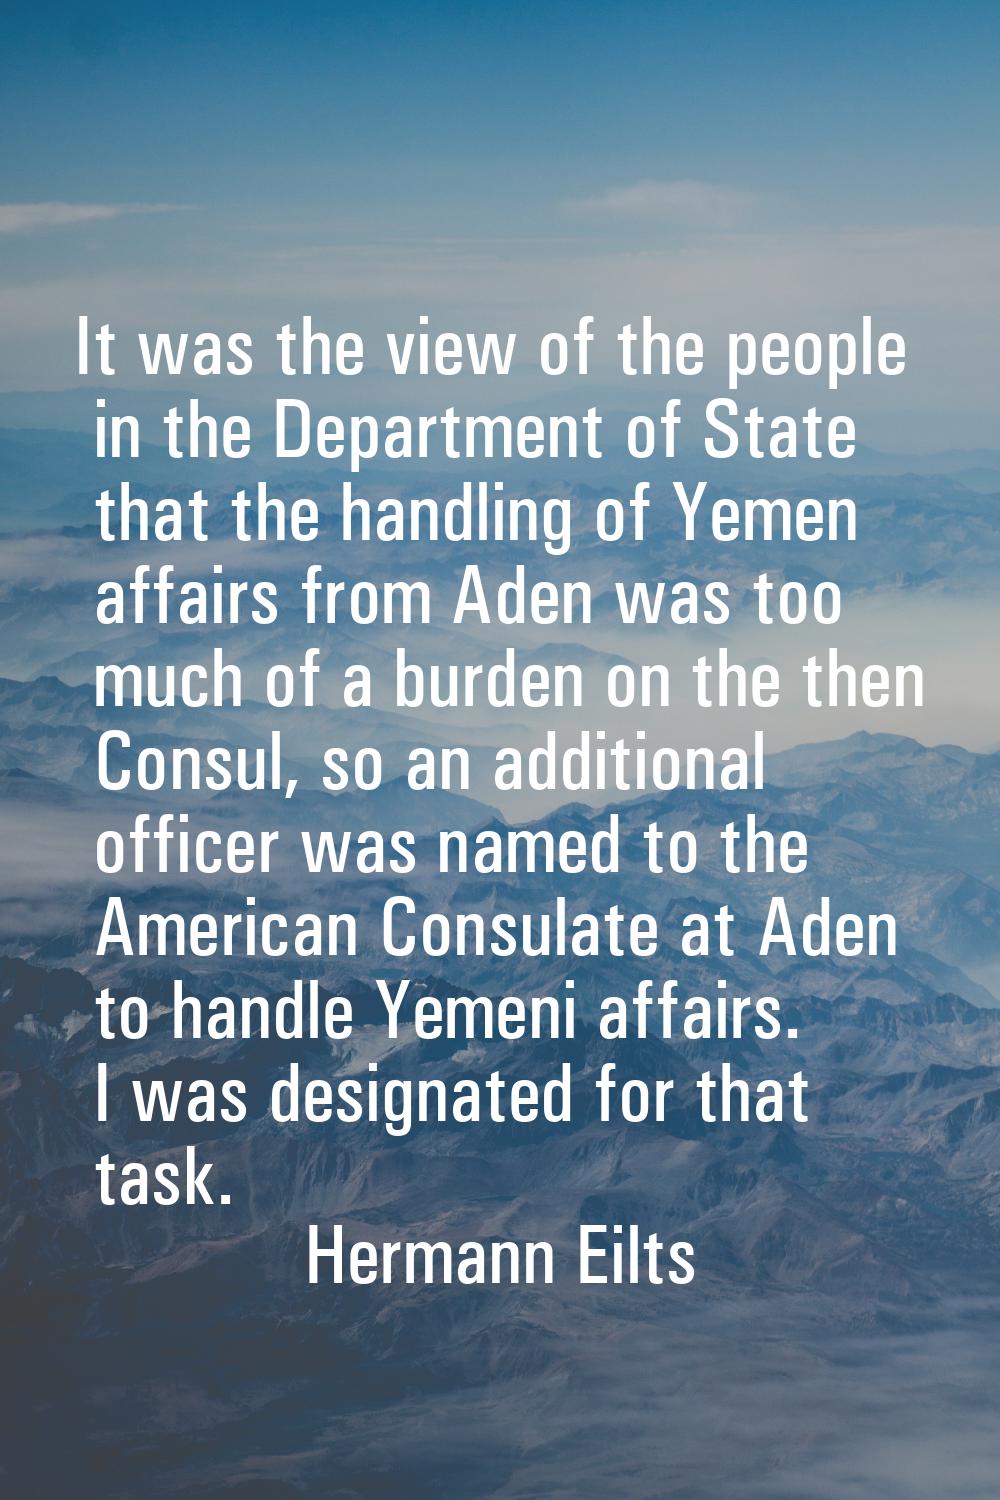 It was the view of the people in the Department of State that the handling of Yemen affairs from Ad